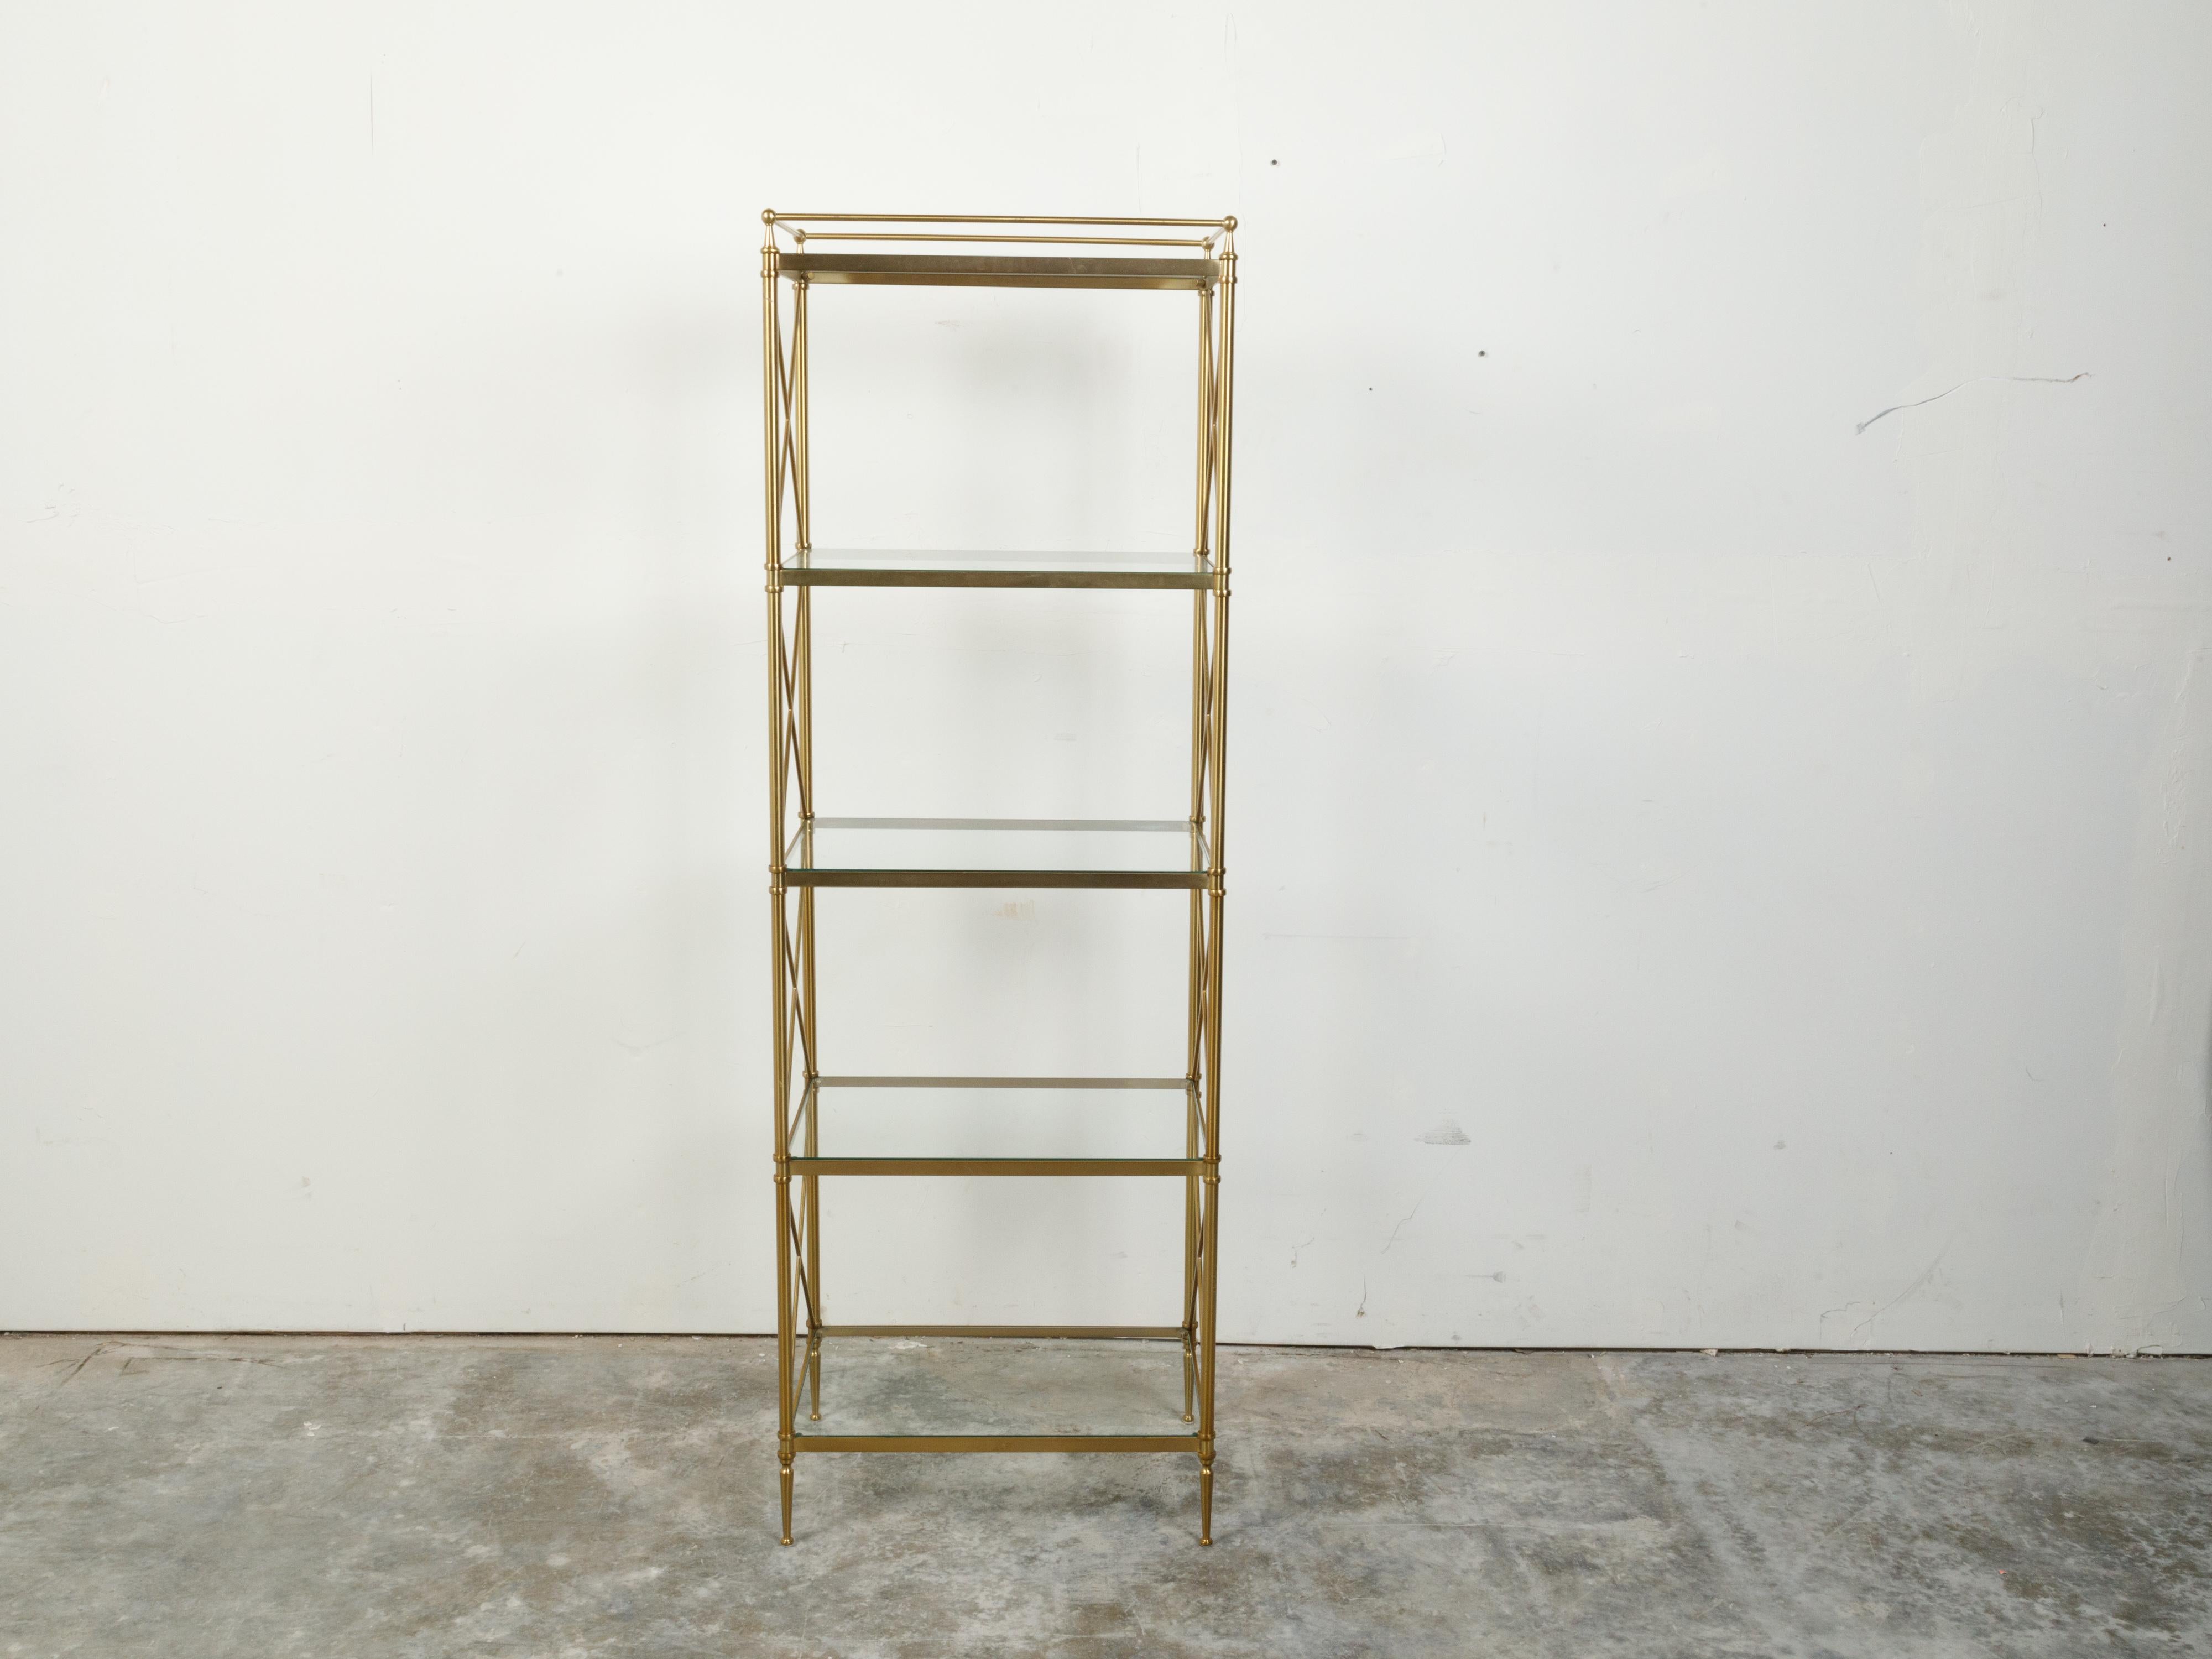 An Italian vintage brass bookshelf from the mid 20th century, with glass shelves and X-Form motifs. Created in Italy during the midcentury period, this narrow bookcase features a linear brass structure securing five glass shelves. Flanked with